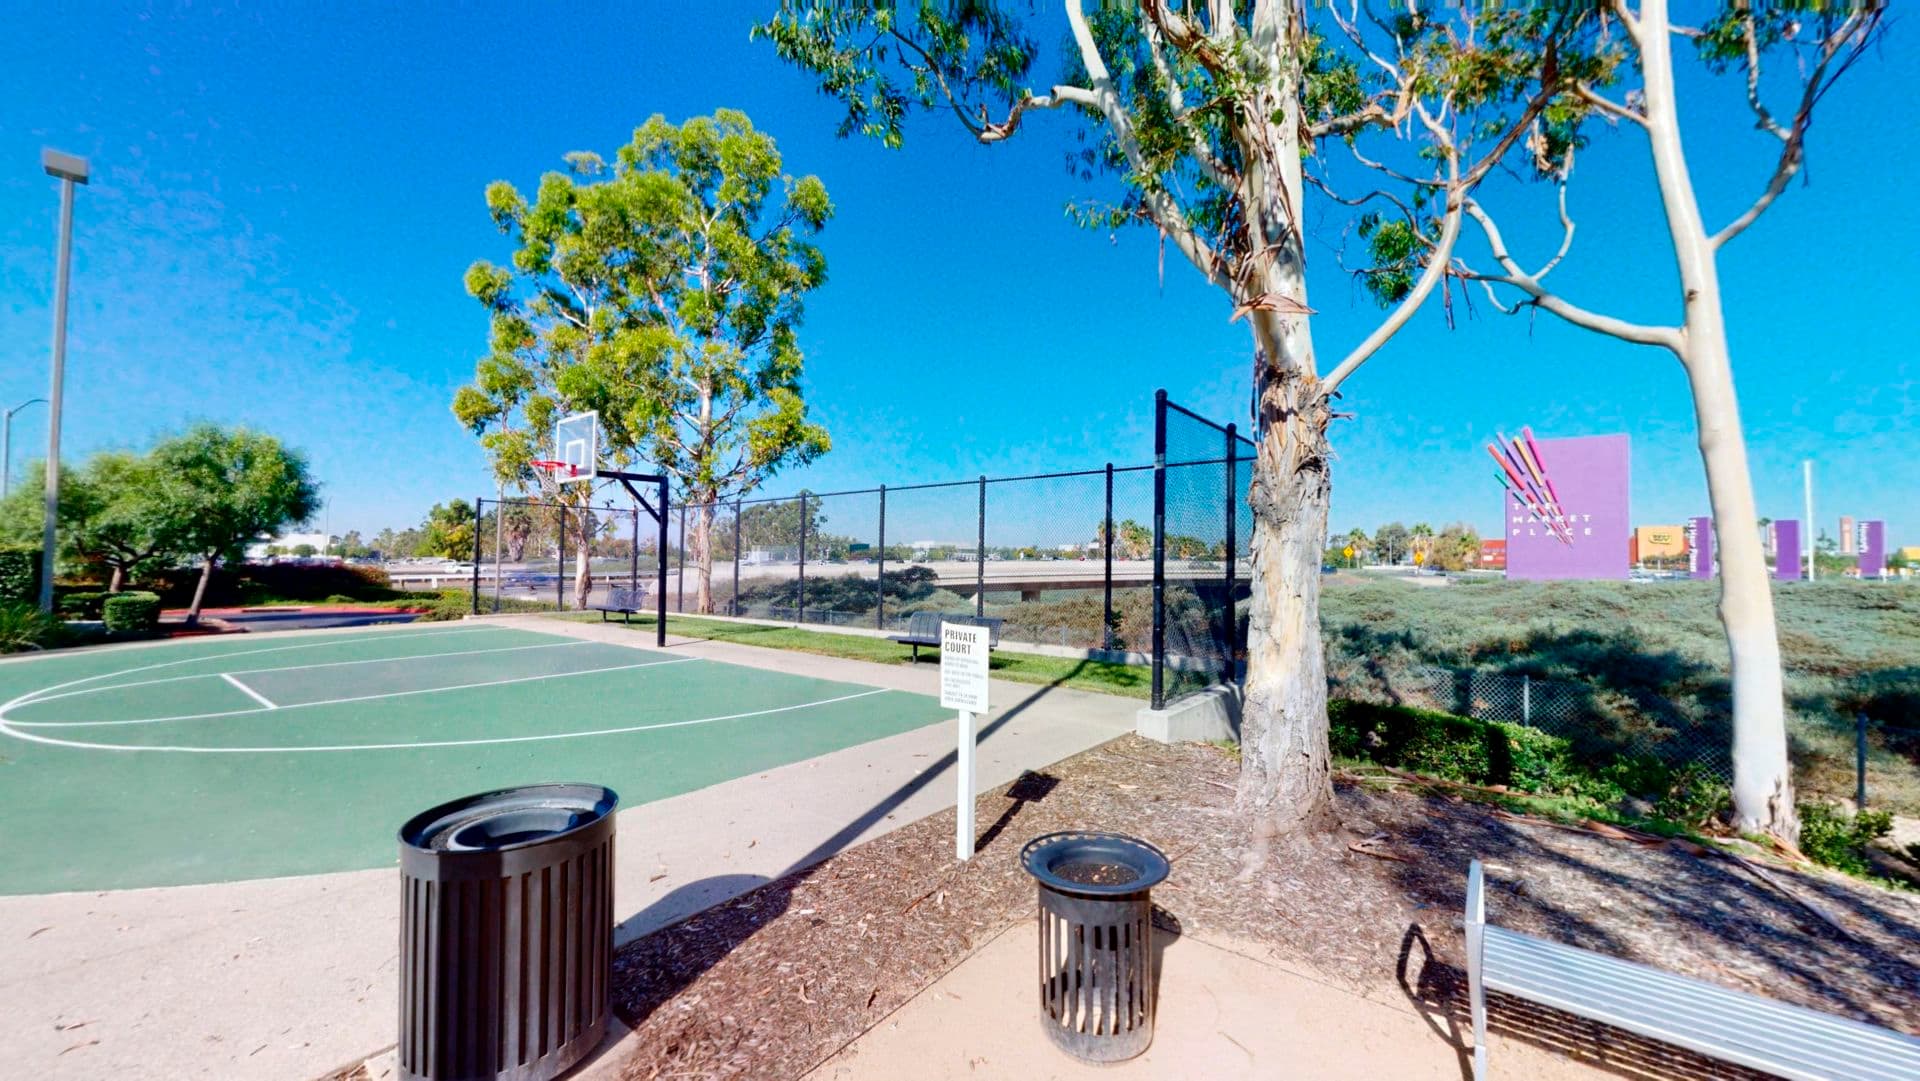 Outdoor photography for the Basketball Court at 3210 El Camino at Marketplace Center in Irvine, CA.